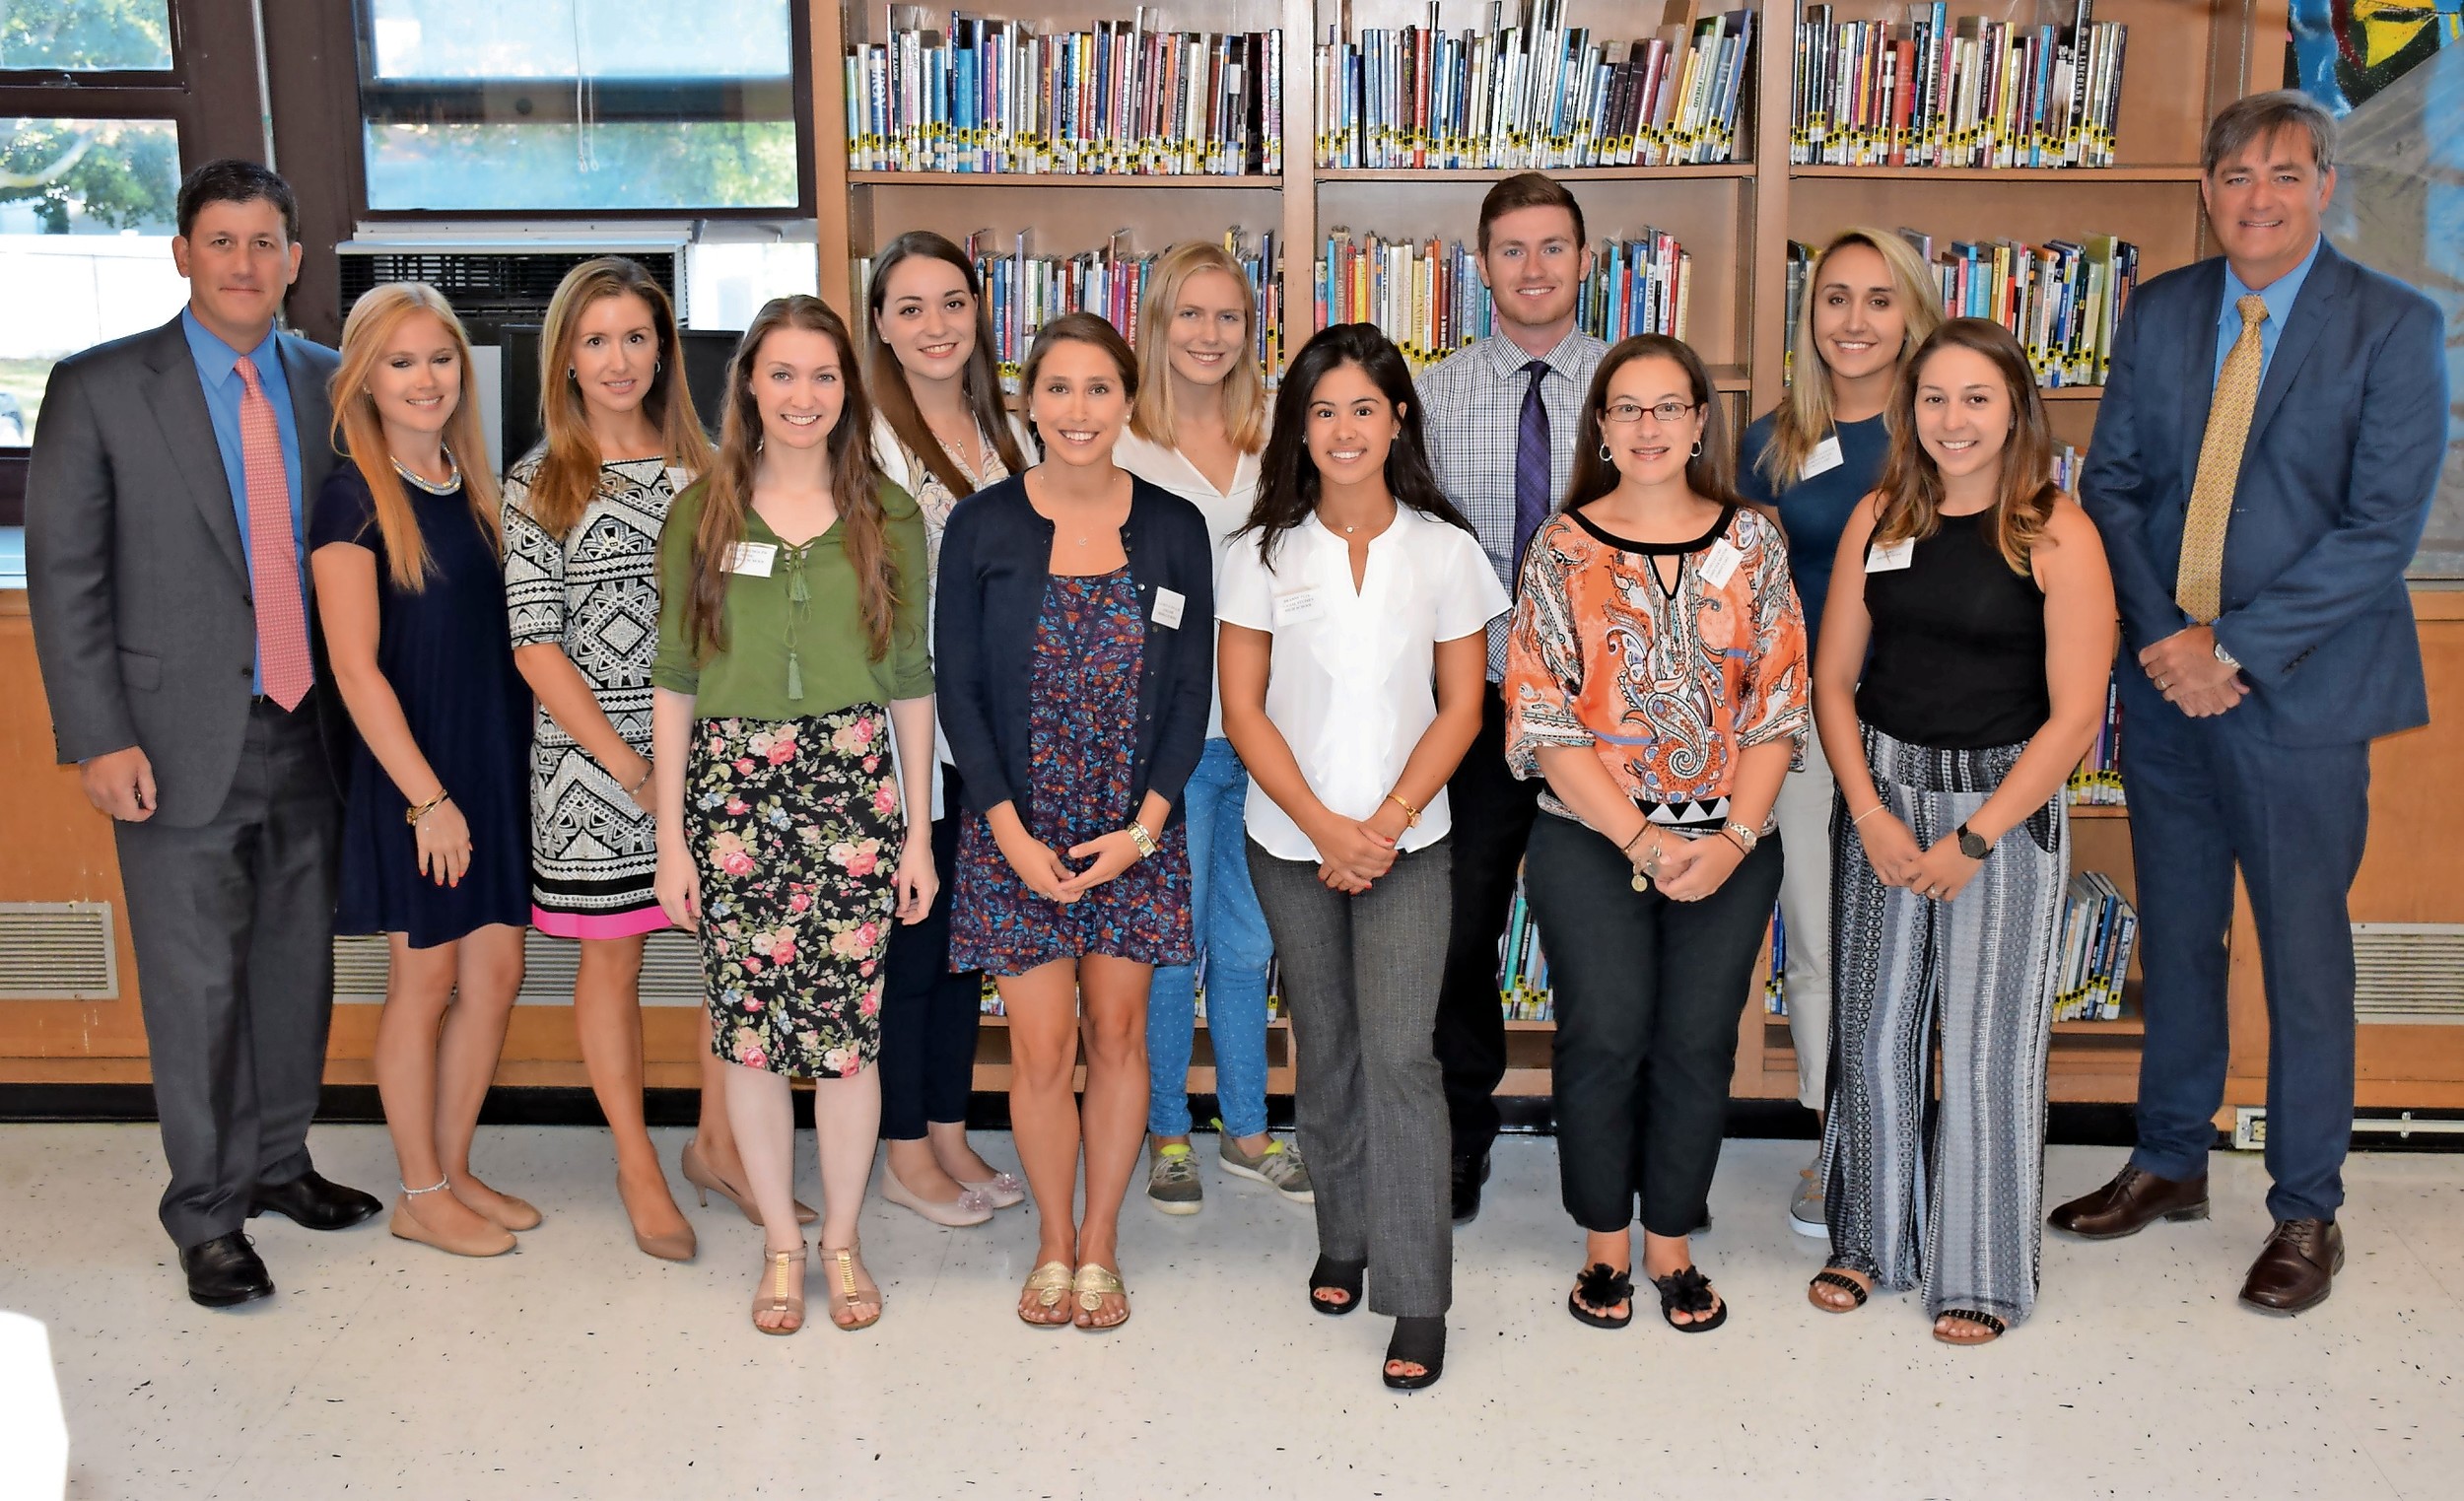 Dr. Marc Ferris, far left, Wantagh’s assistant superintendent for instruction, and Superintendent John McNamara, far right, welcomed the district’s new teachers during orientation on Aug. 28.